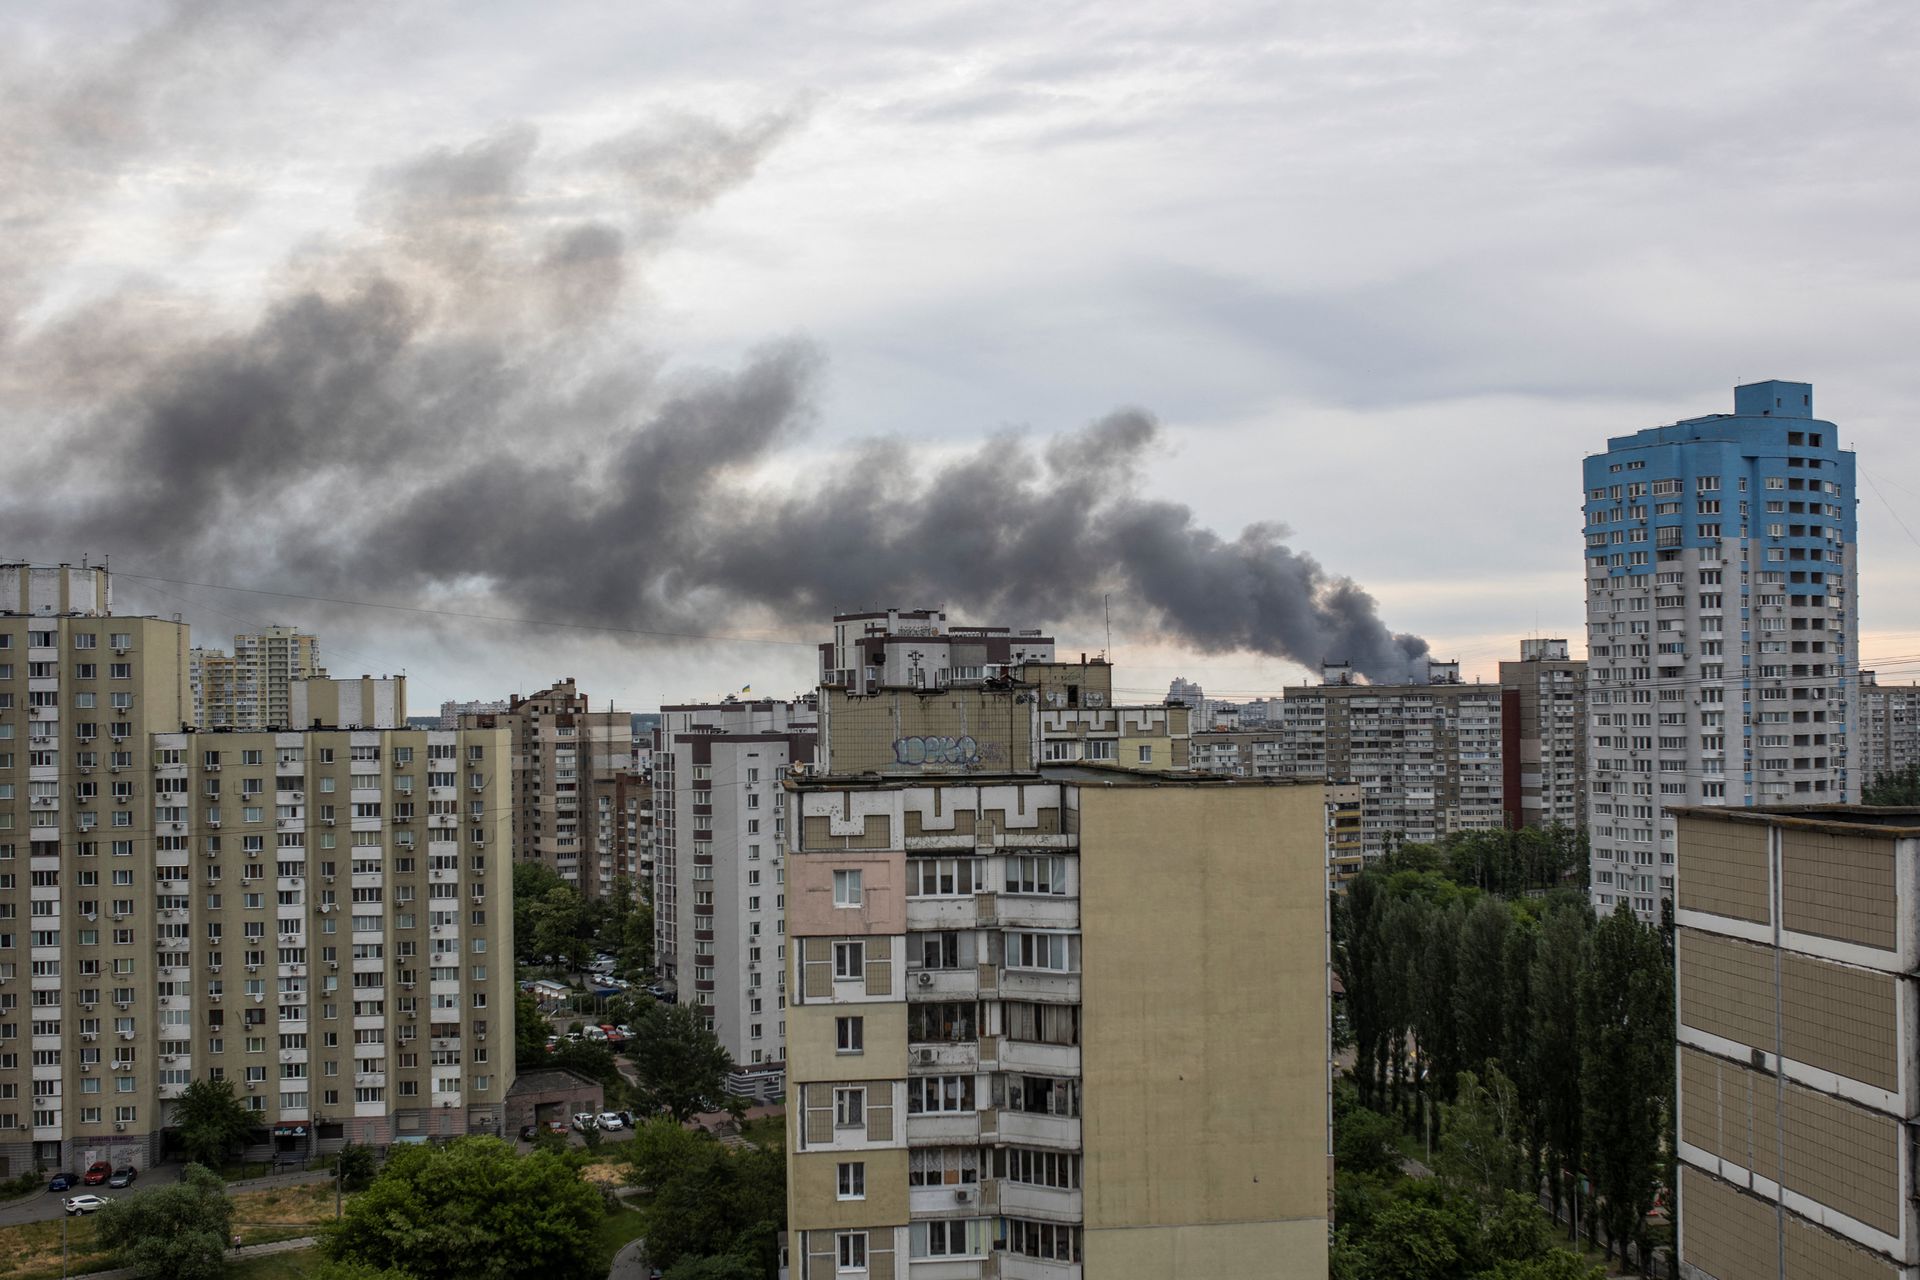 Russian Cruise Missile Attack Targets Kyiv, Resulting In Casualty In Odesa